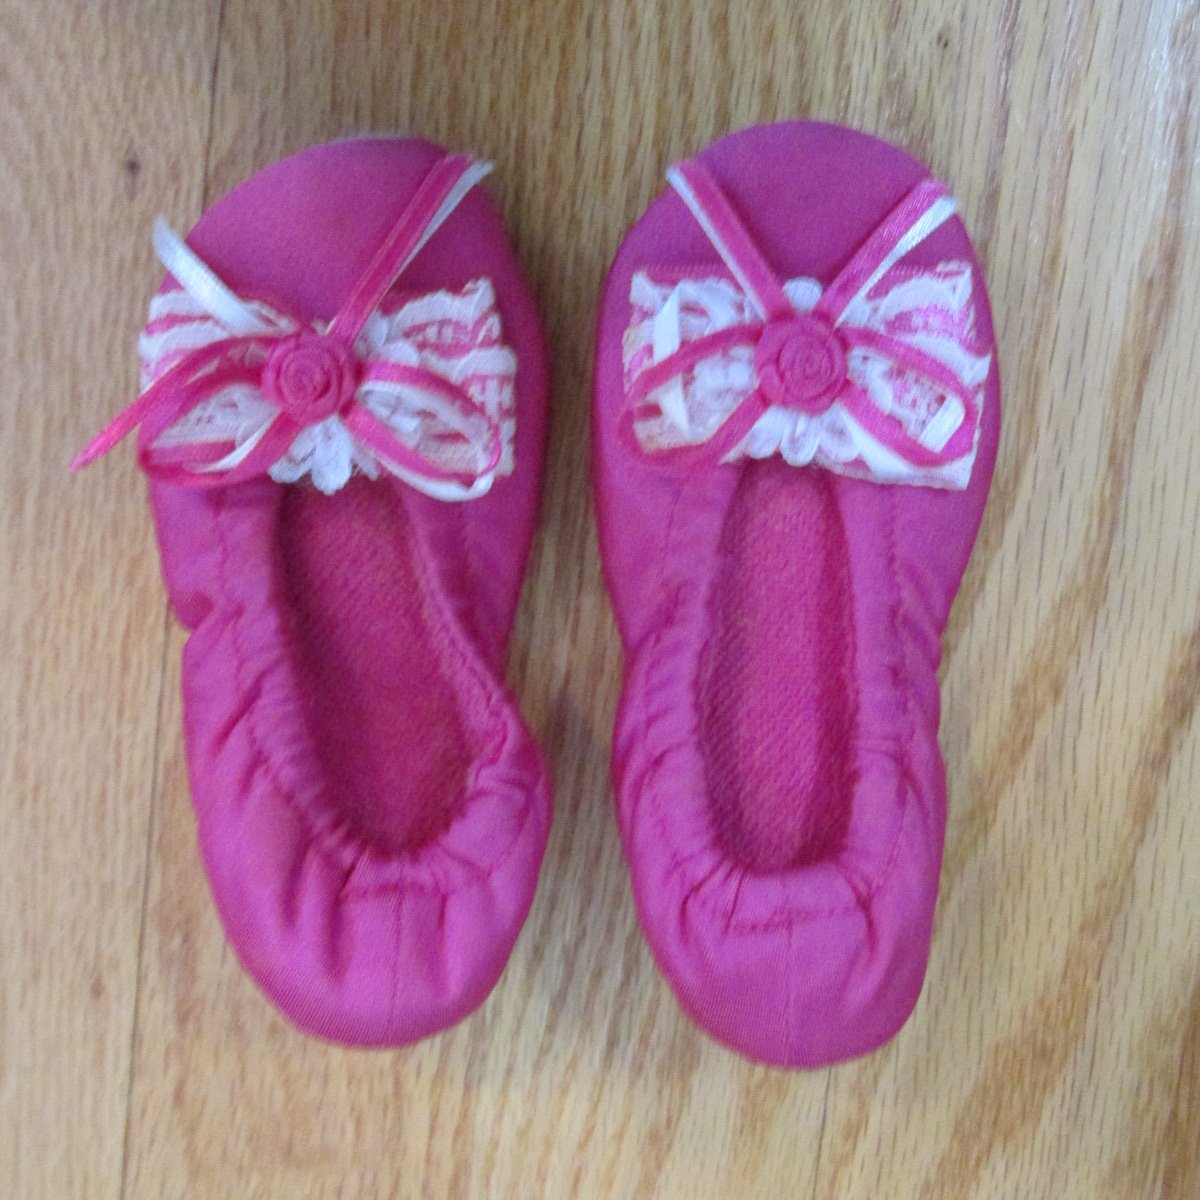 GIRL'S SIZE M (7 / 8) SHOES FUCHSIA PINK BALLET SLIPPERS LEATHER SOLE BOWS